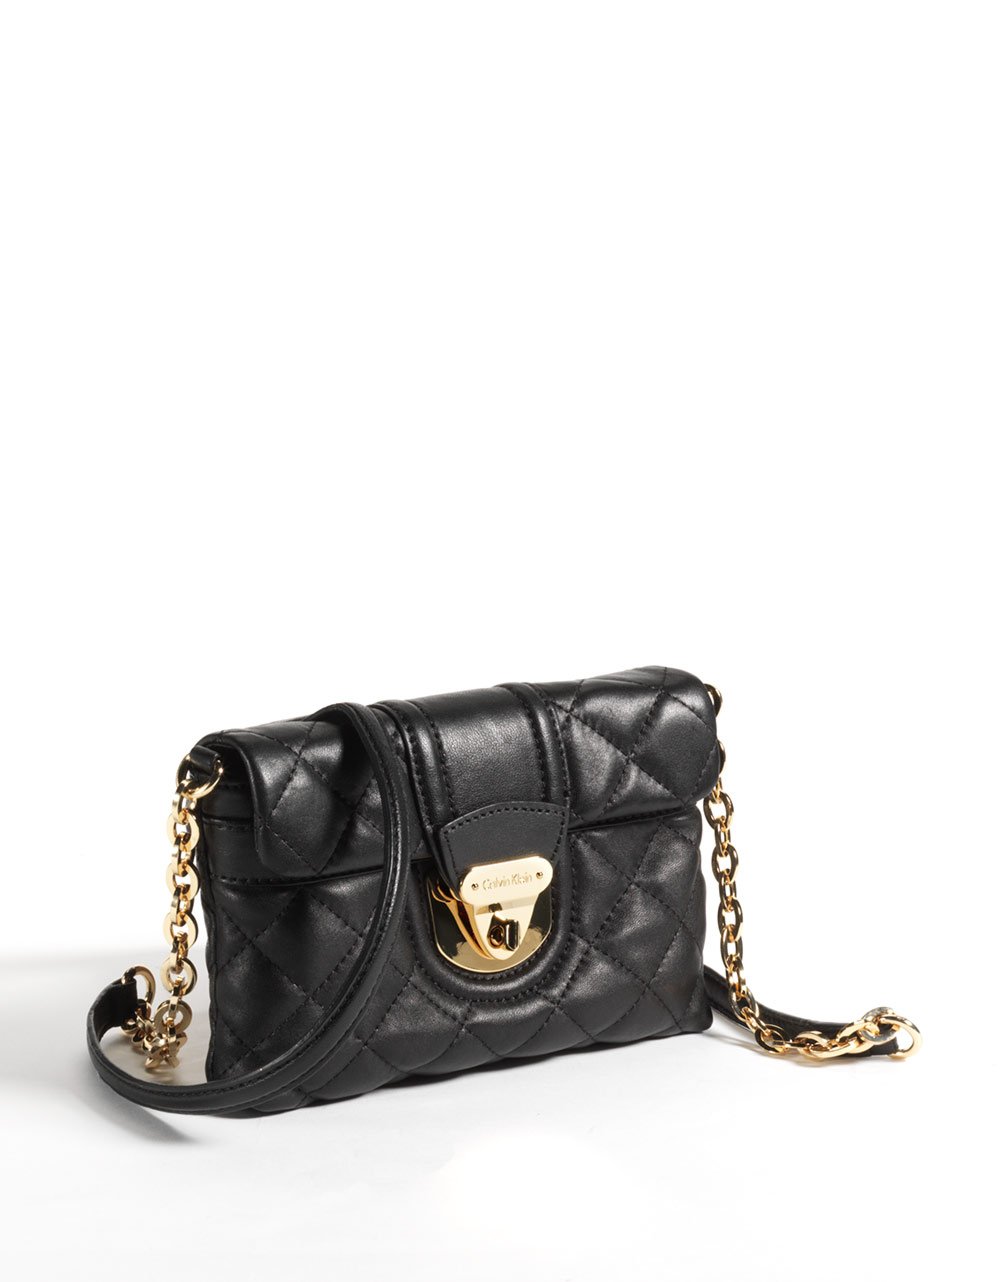 Calvin Klein Quilted Leather Crossbody Bag in Black (black w/ gold) | Lyst